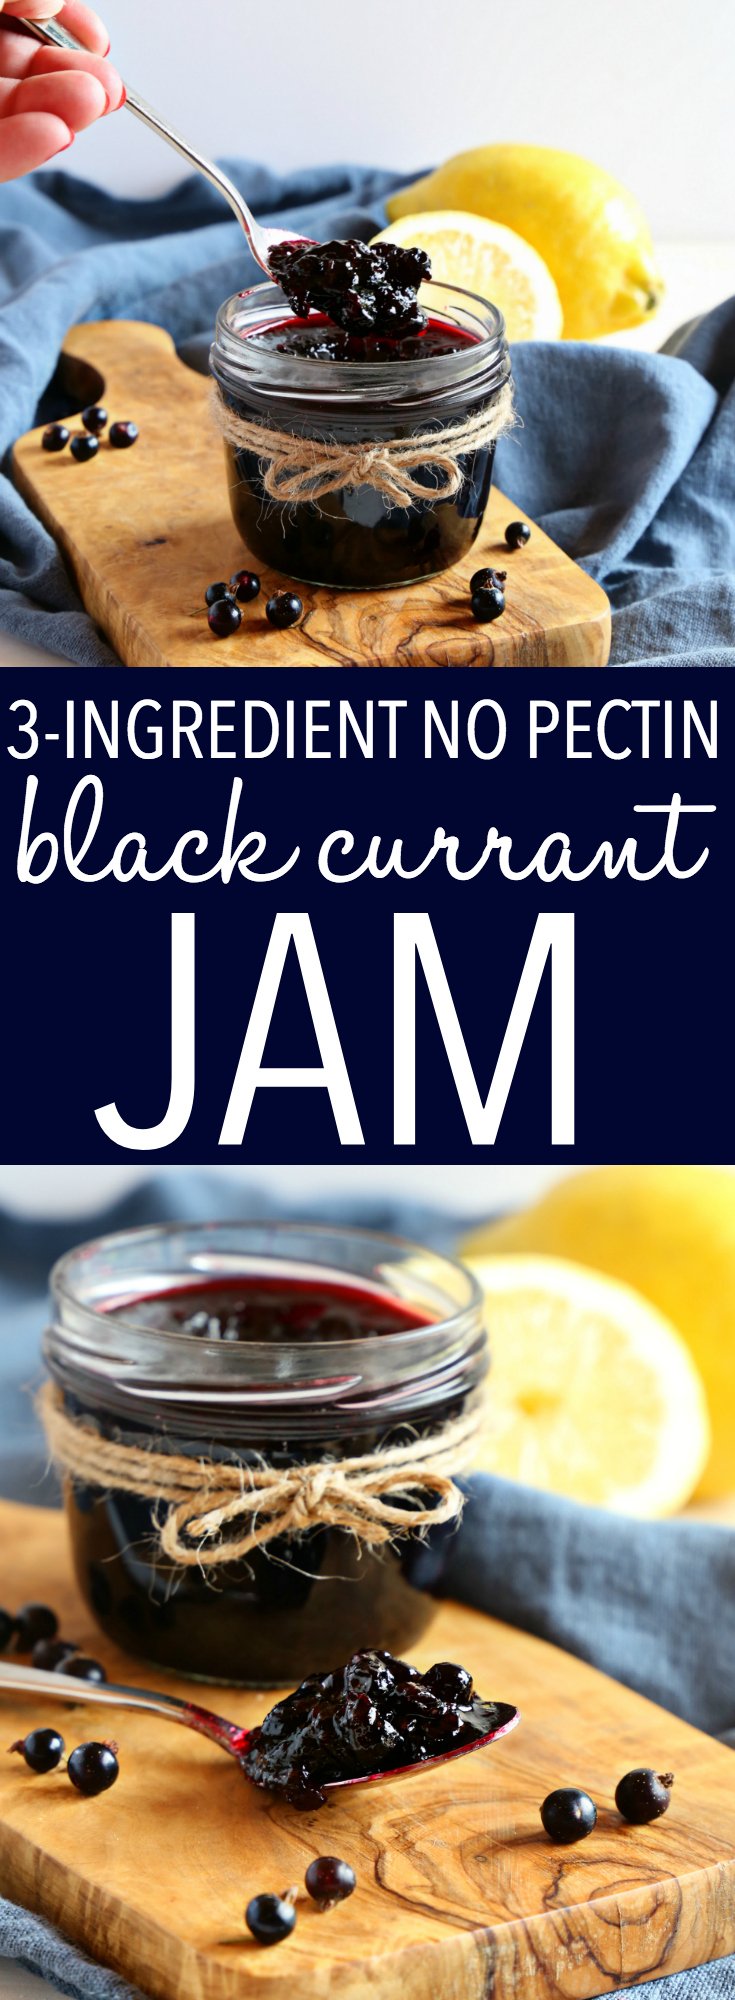 This Best Ever Black Currant Jam is made with only 3 simple ingredients and it's the perfect homemade jam for summer! Learn how to make jam with NO pectin in 15 minutes! Recipe from thebusybaker.ca! #homemadejam #homemade #jam #blackcurrant #jamrecipe #recipe #easy #homestead #canning #summer #preserving #berries via @busybakerblog